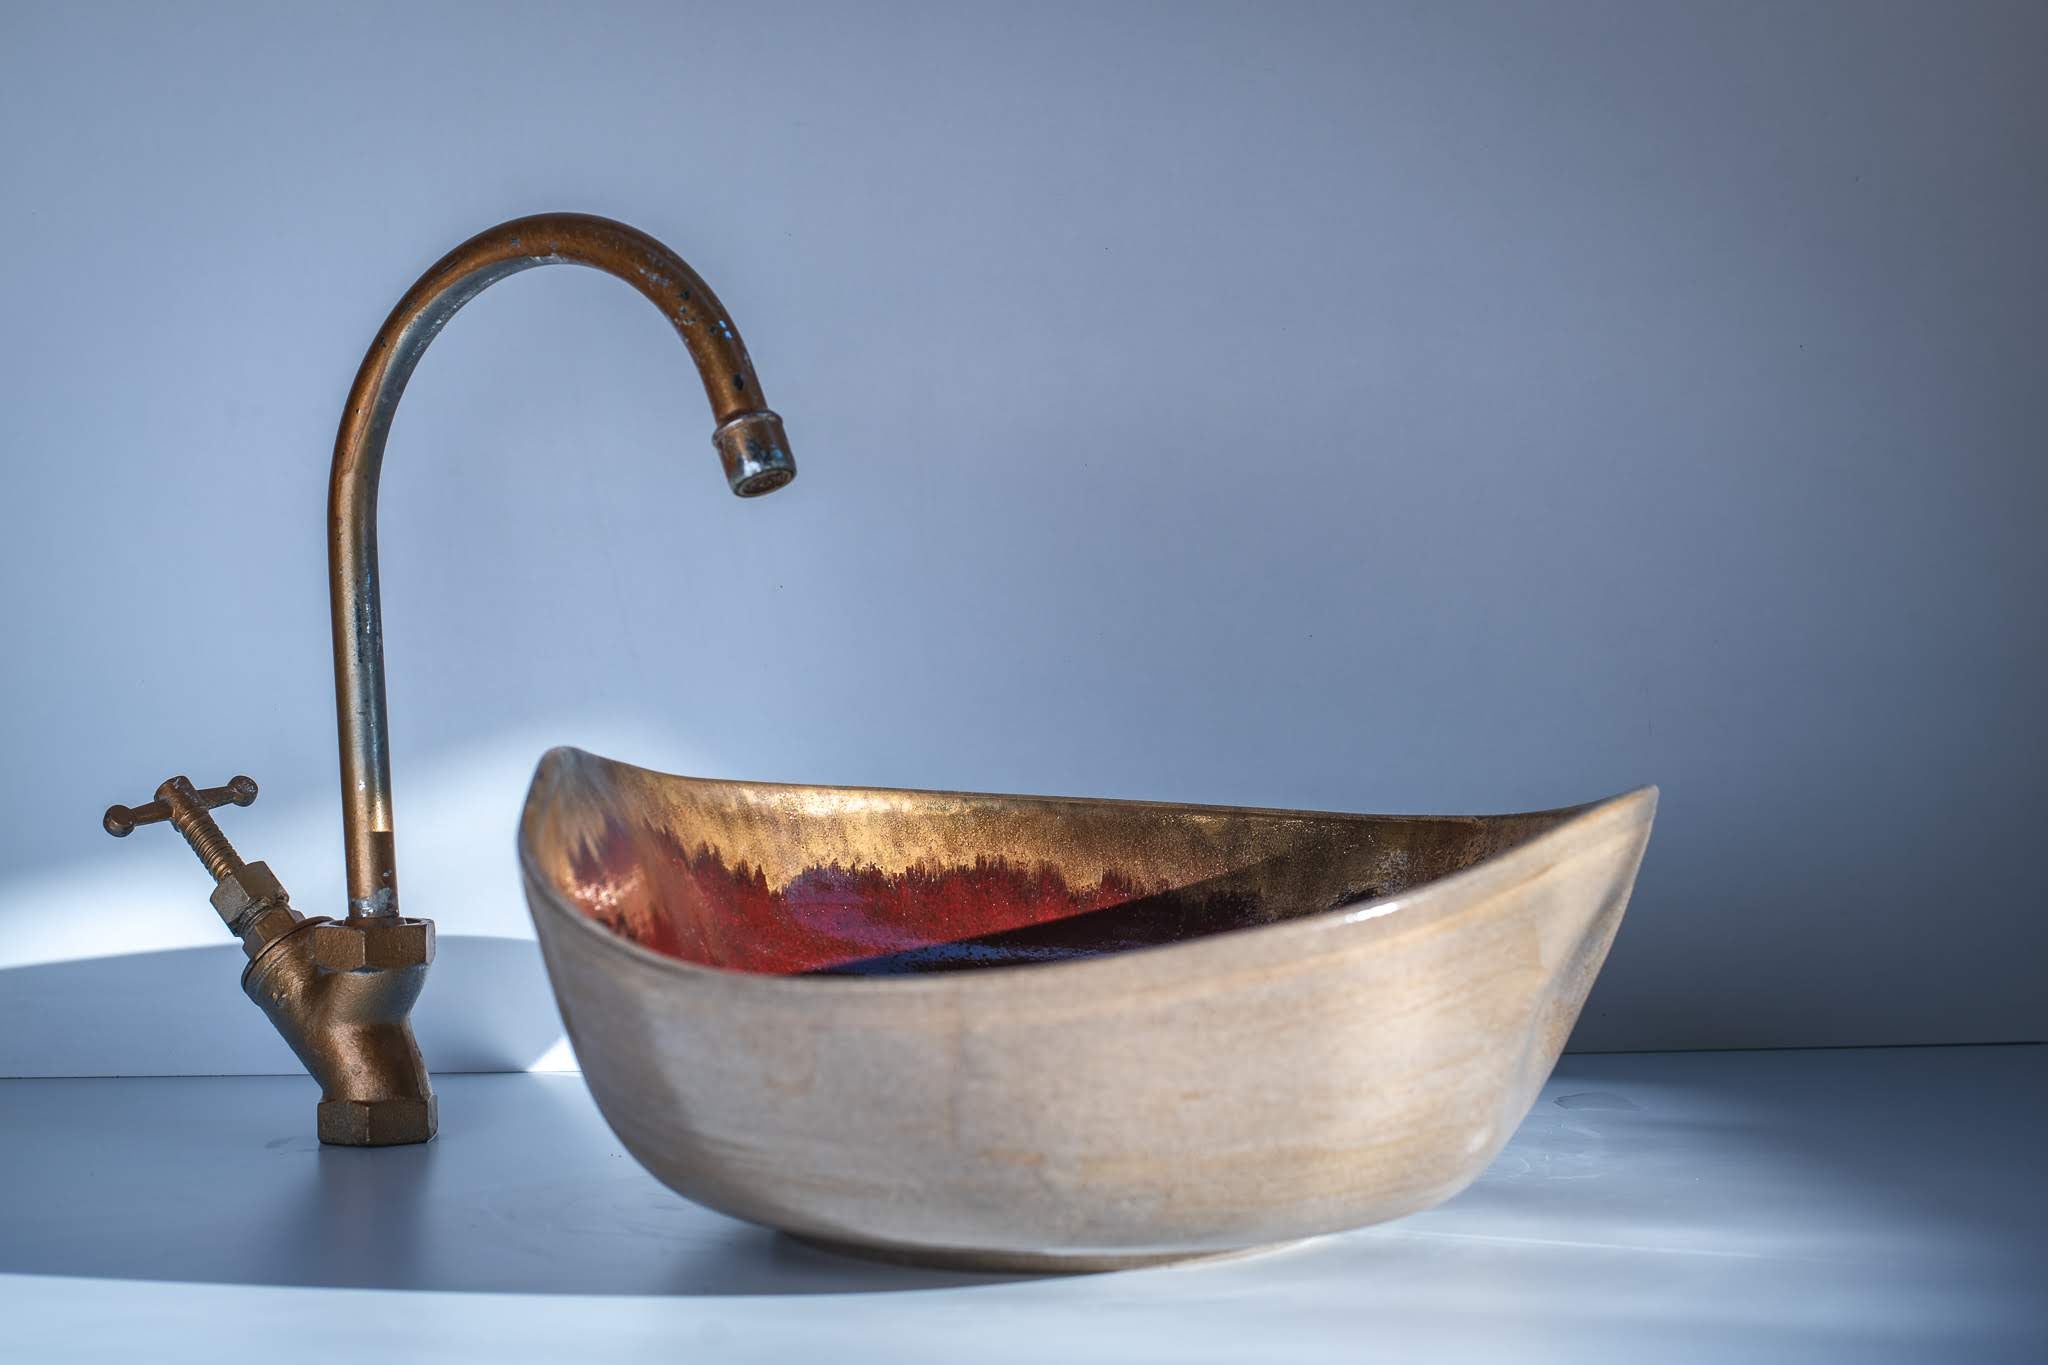 Gold Feather Handcrafted sink by Naiimpottery